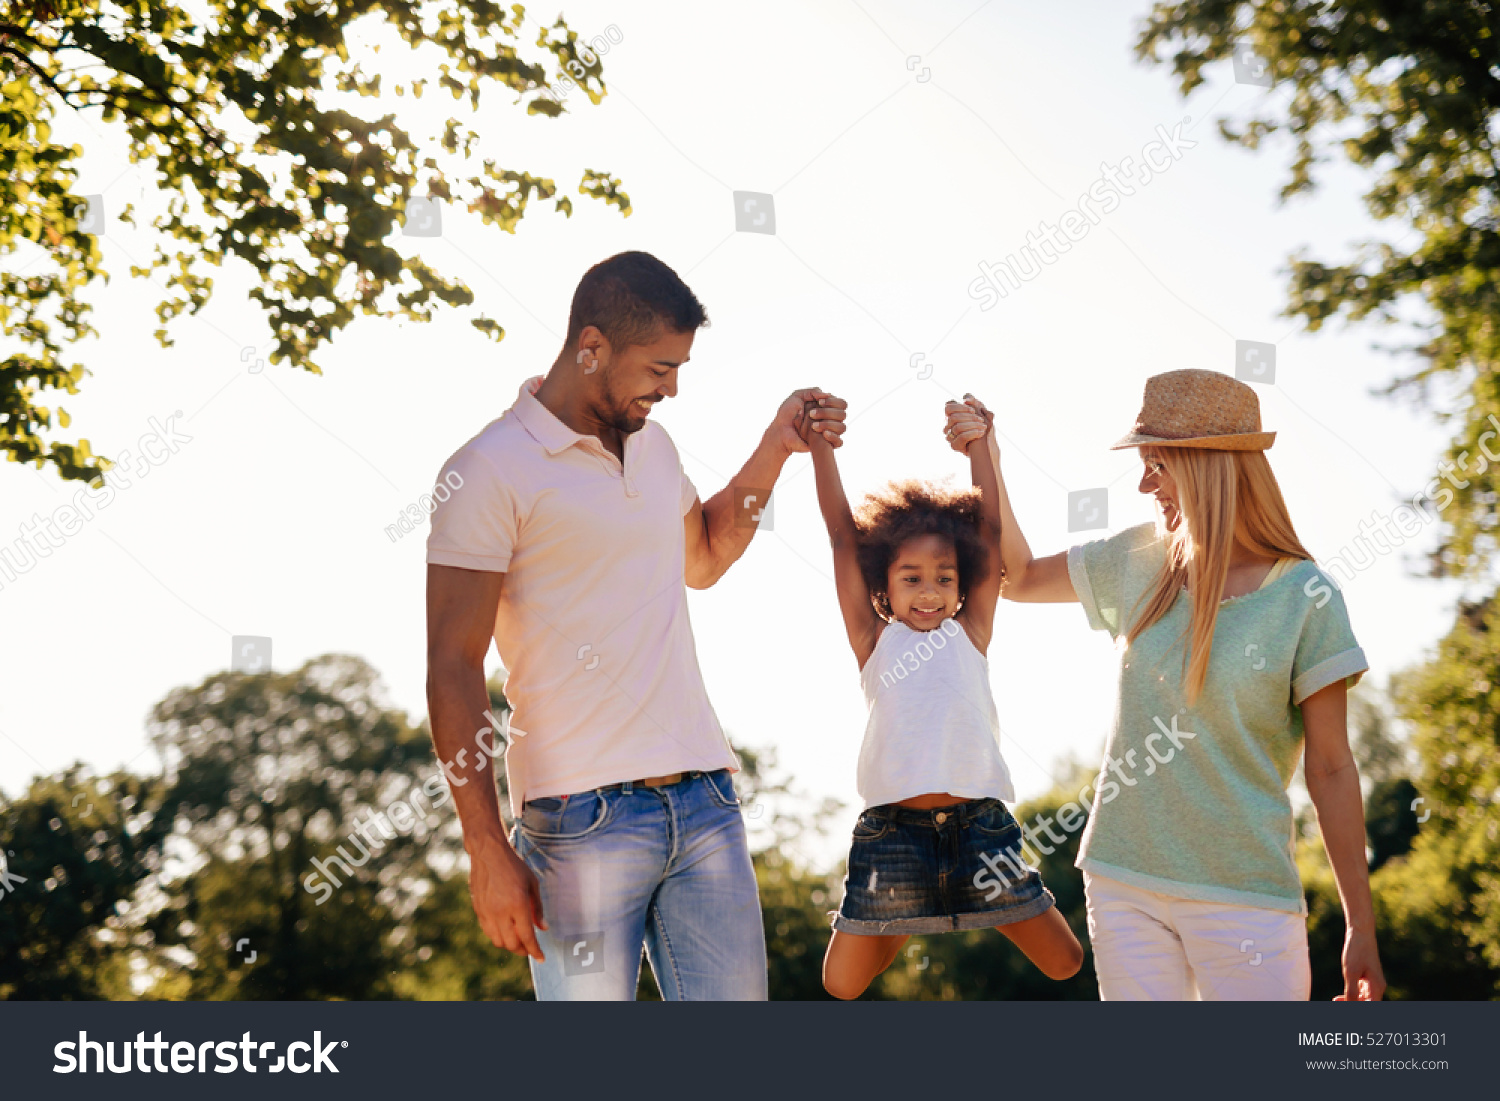 Playful family having fun outdoors and walking #527013301